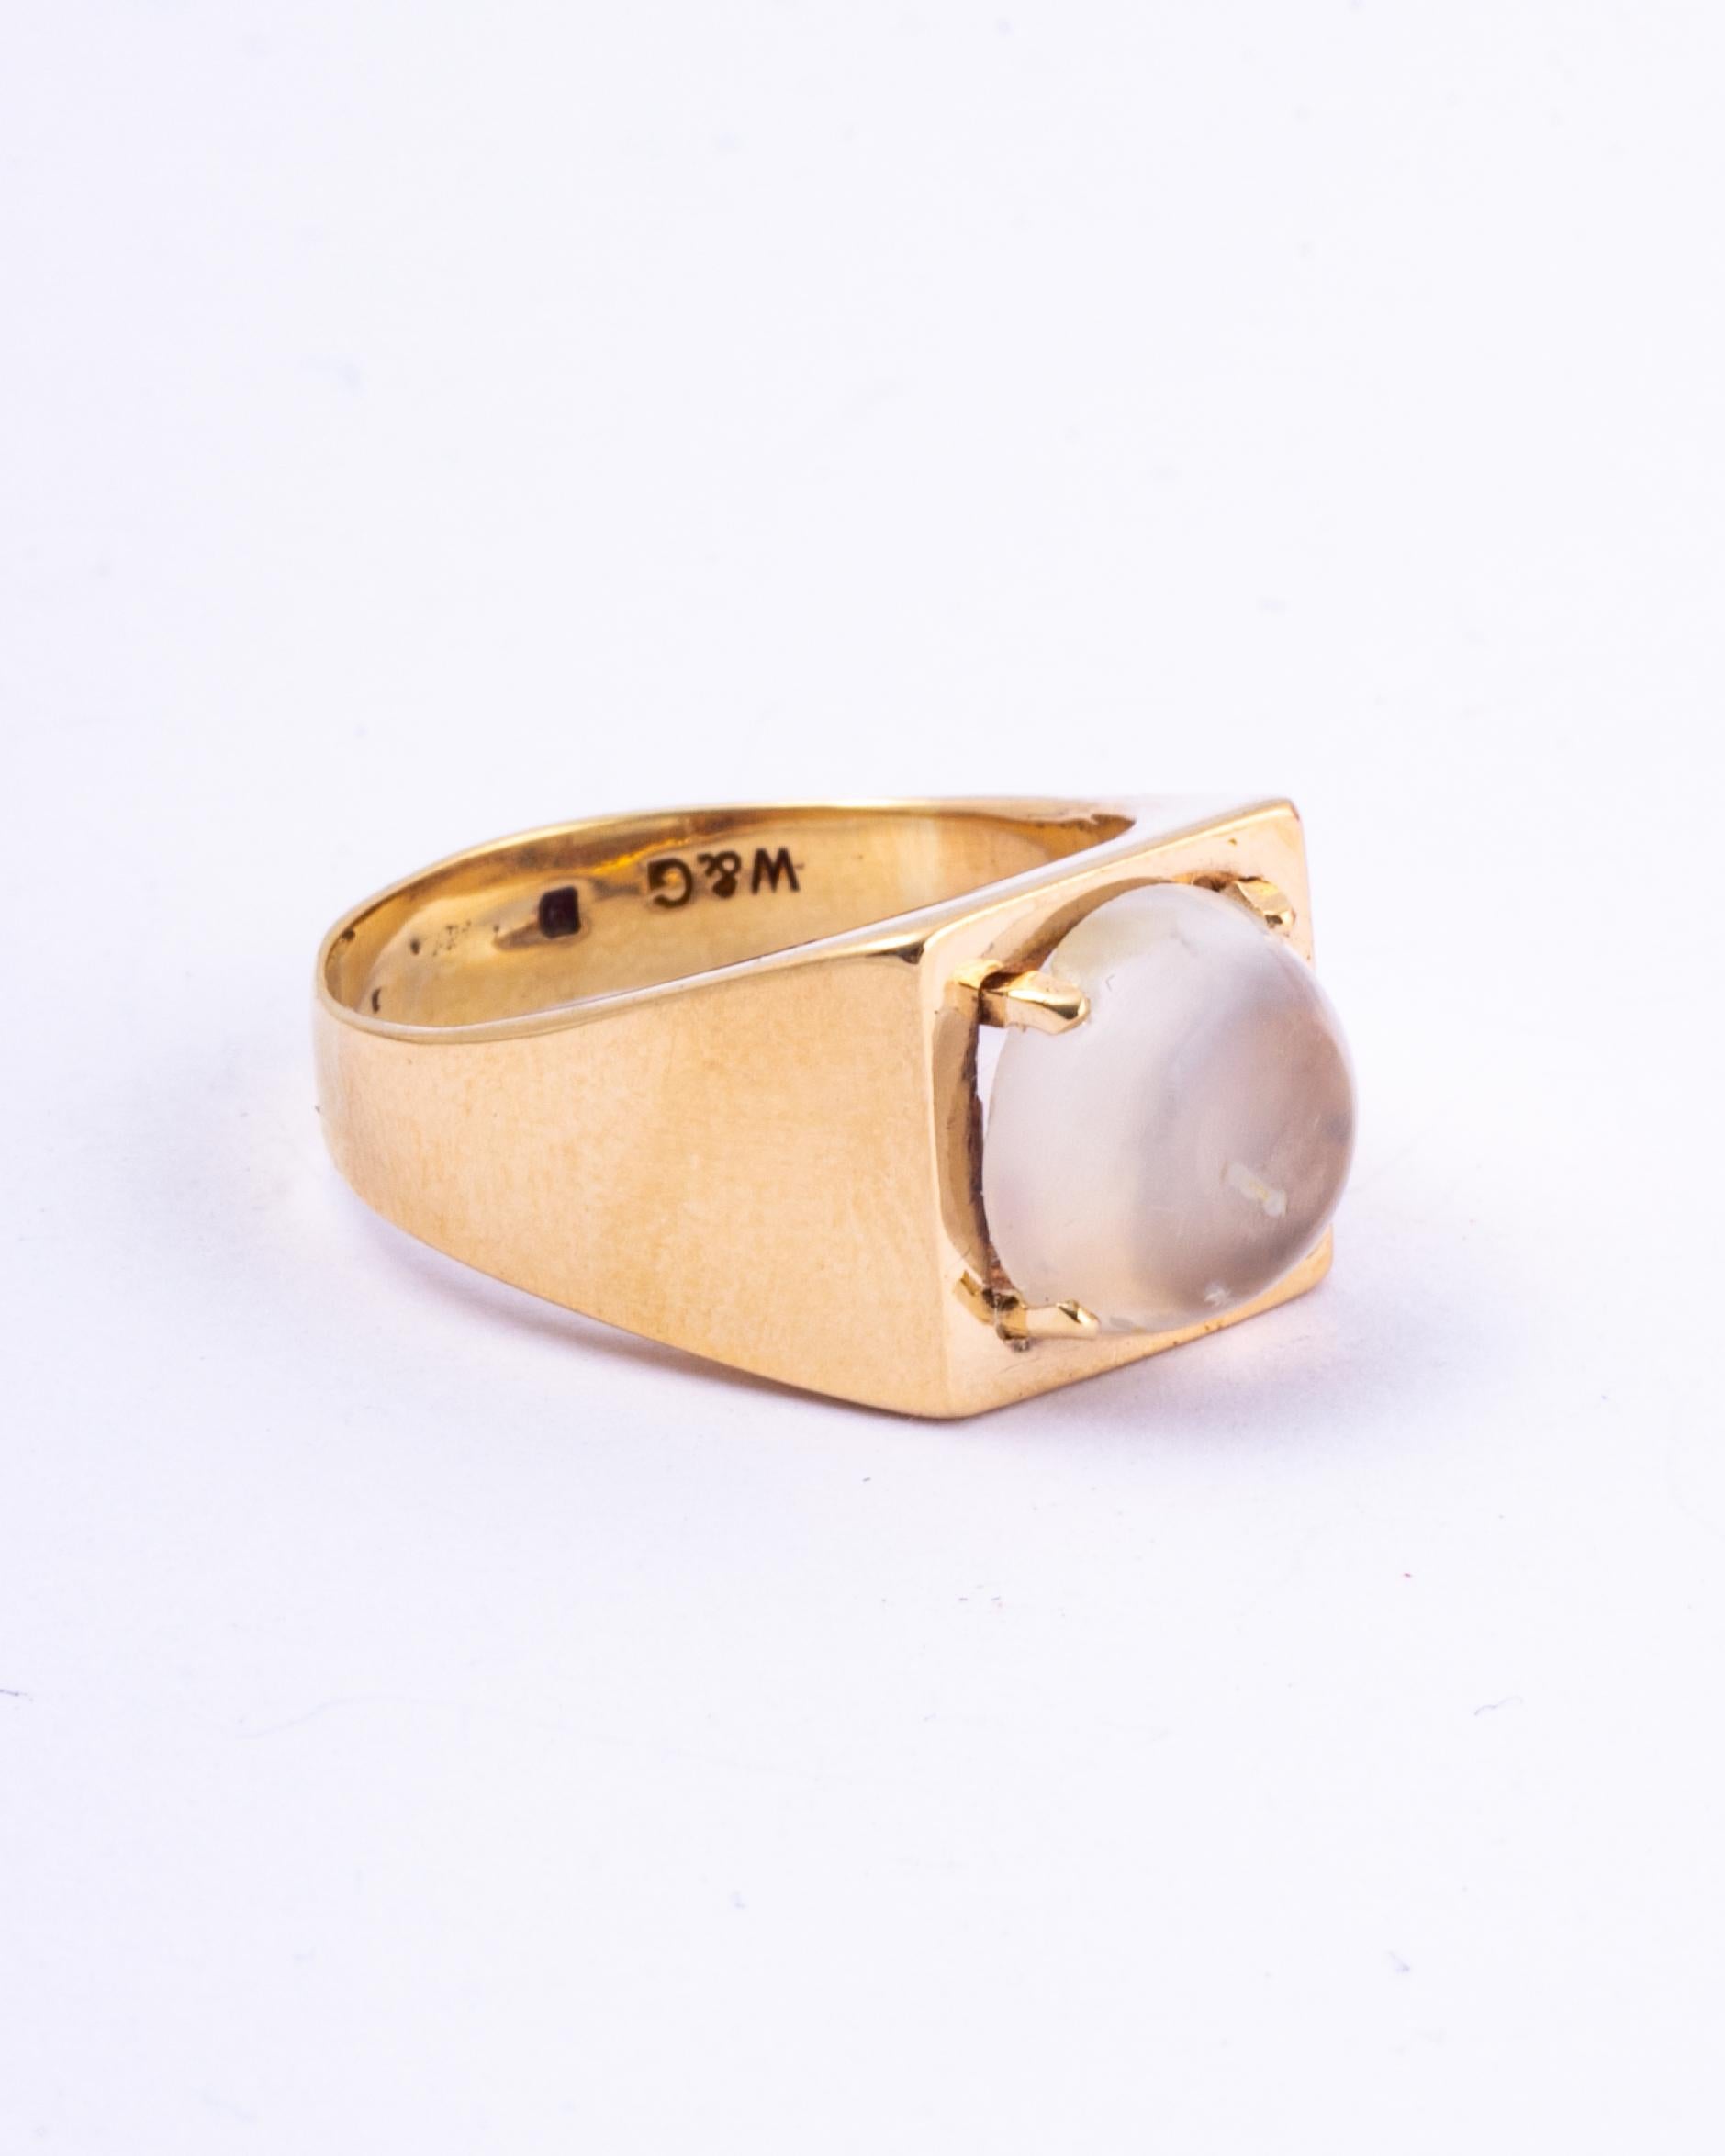 This wonderful glossy 9carat gold band holds a gorgeous moonstone on top. The band is angular in true Art Deco style. 

Ring Size: L 1/2 or 6 
Height Off Finger: 7mm
Stone Diameter: 9mm

Weight: 4.6g